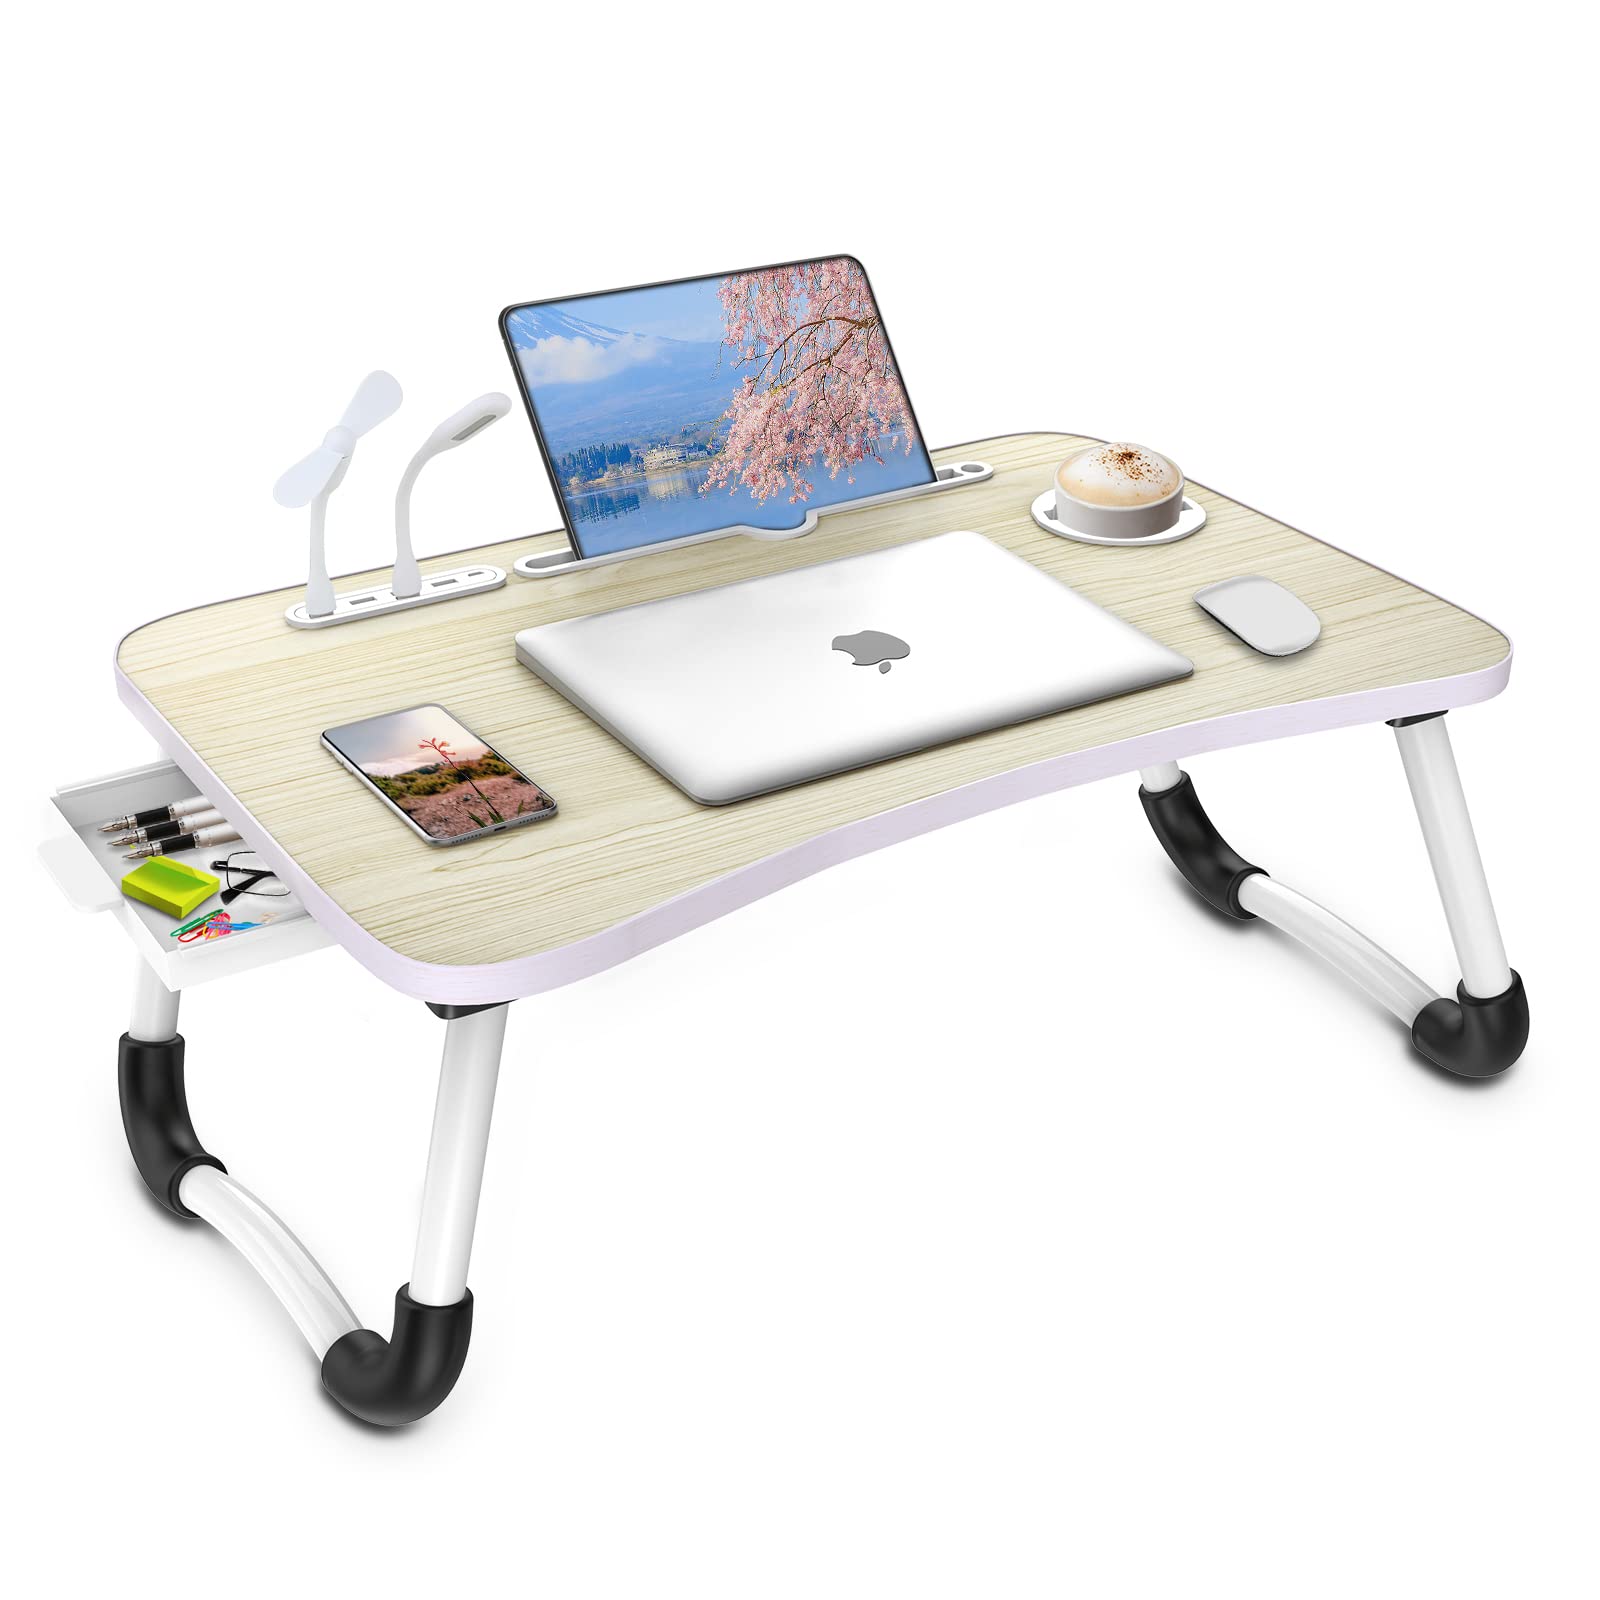 Zapuno Laptop Lap Desk, Foldable Laptop Table Tray With 4 Usb Ports Storage Drawer And Cup Holder, Laptop Bed Desk Laptop Stand 